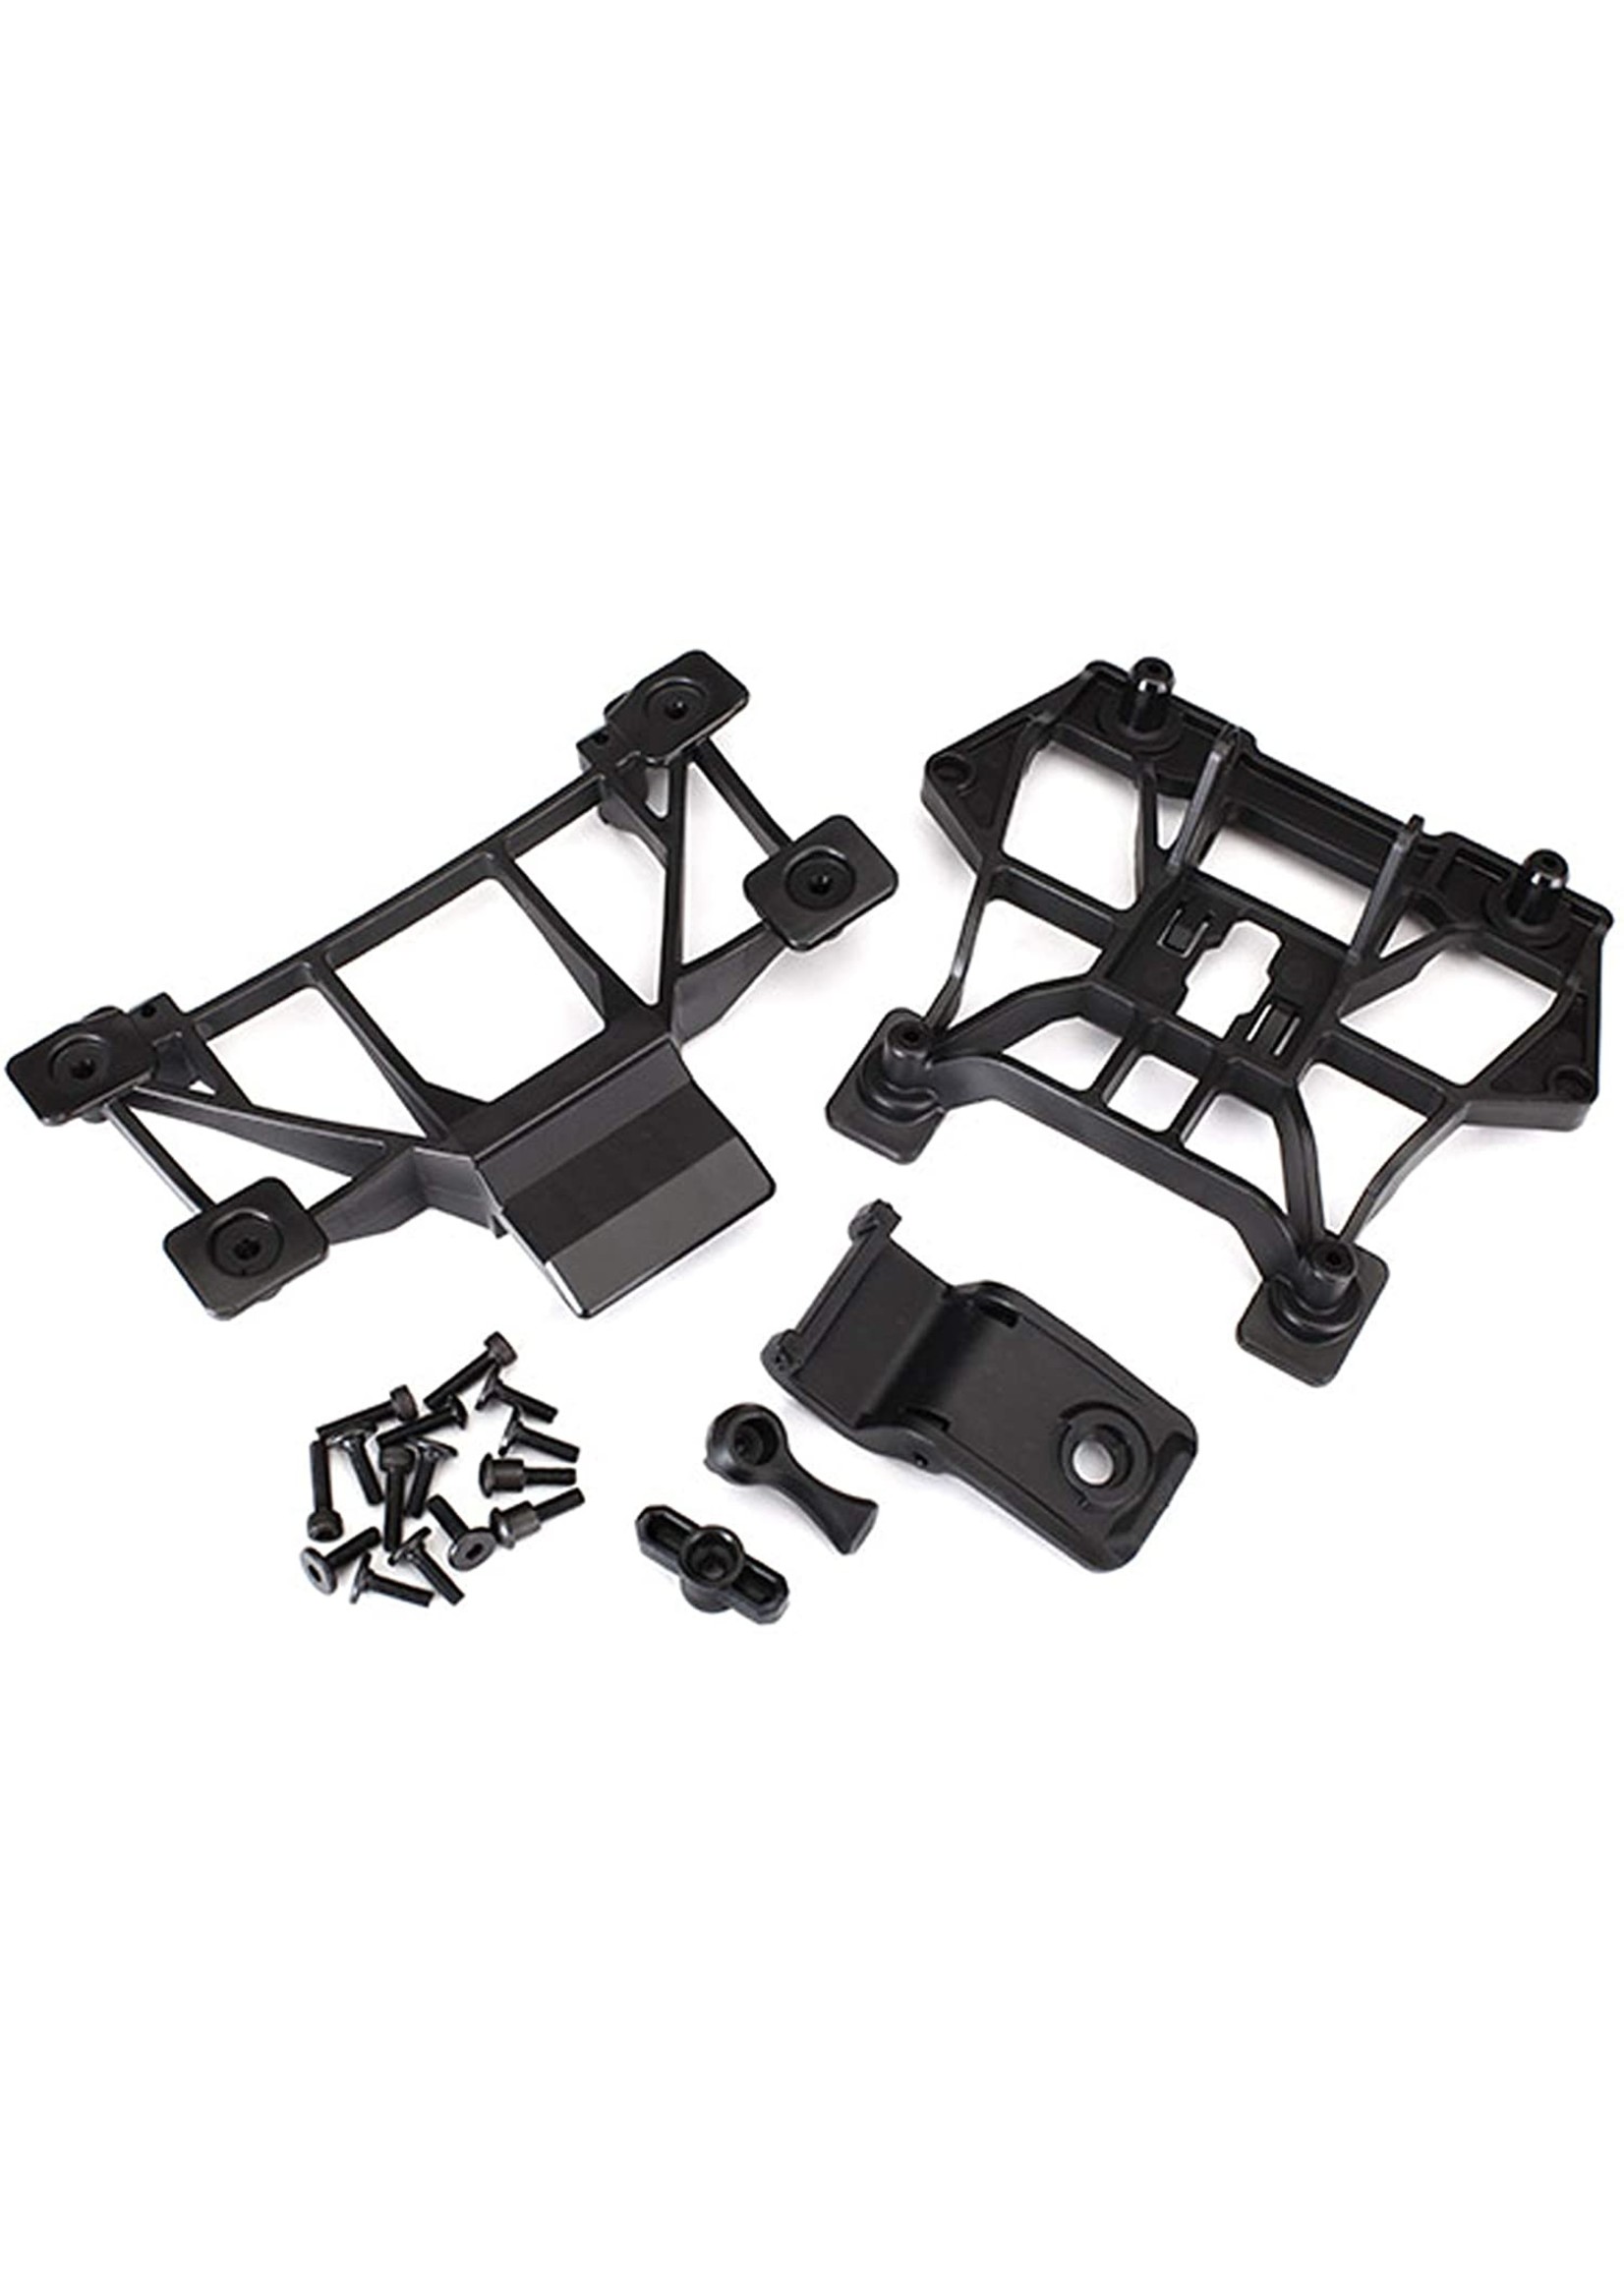 Traxxas 8615 - Front and Rear Body Mounts, Black